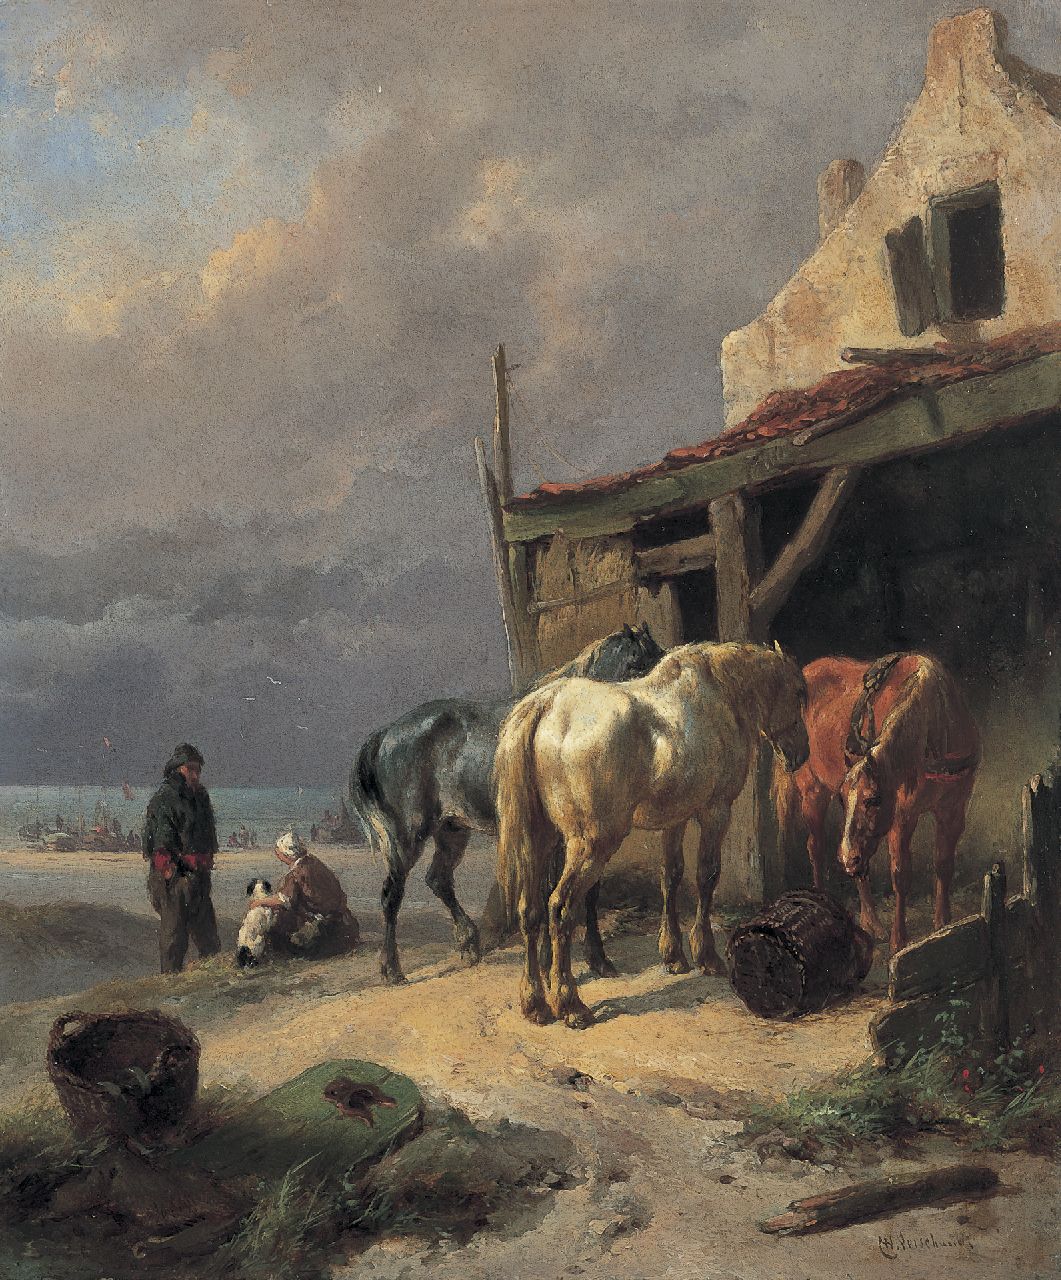 Verschuur W.  | Wouterus Verschuur, Draught horses at rest by the beach, oil on panel 27.1 x 22.5 cm, signed l.r.